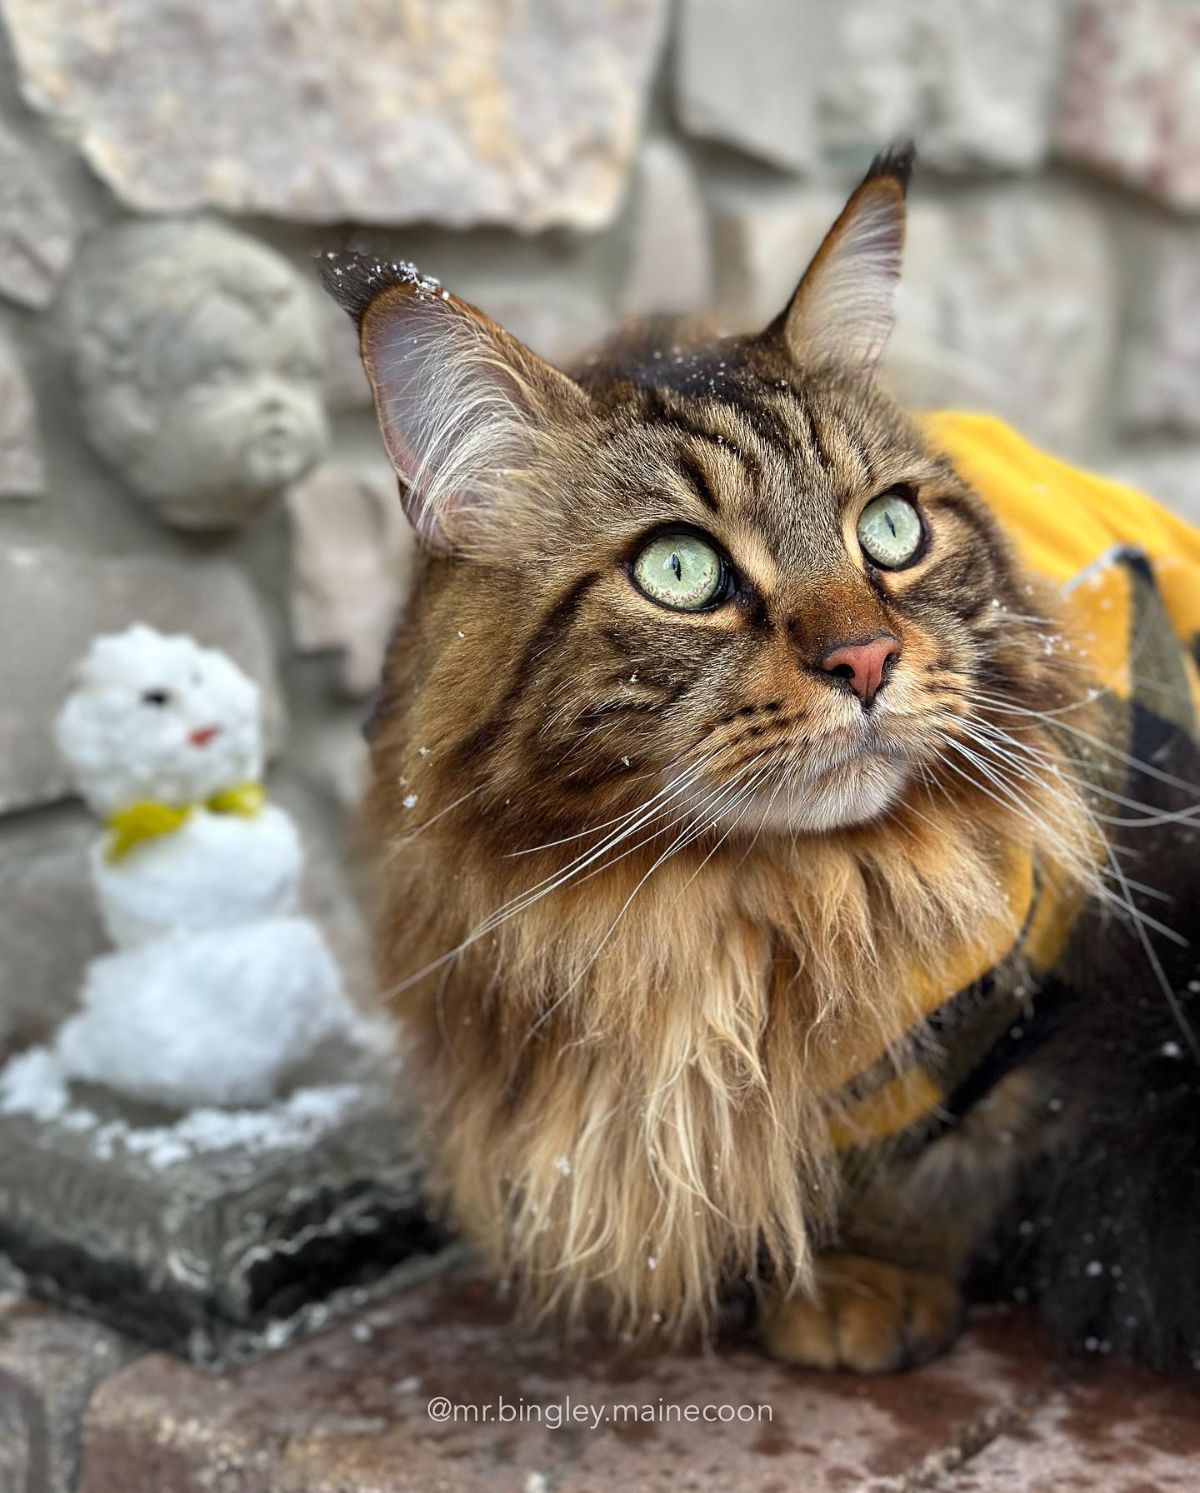 A fluffy brown maine coon with green eyes sitting on a pavement.